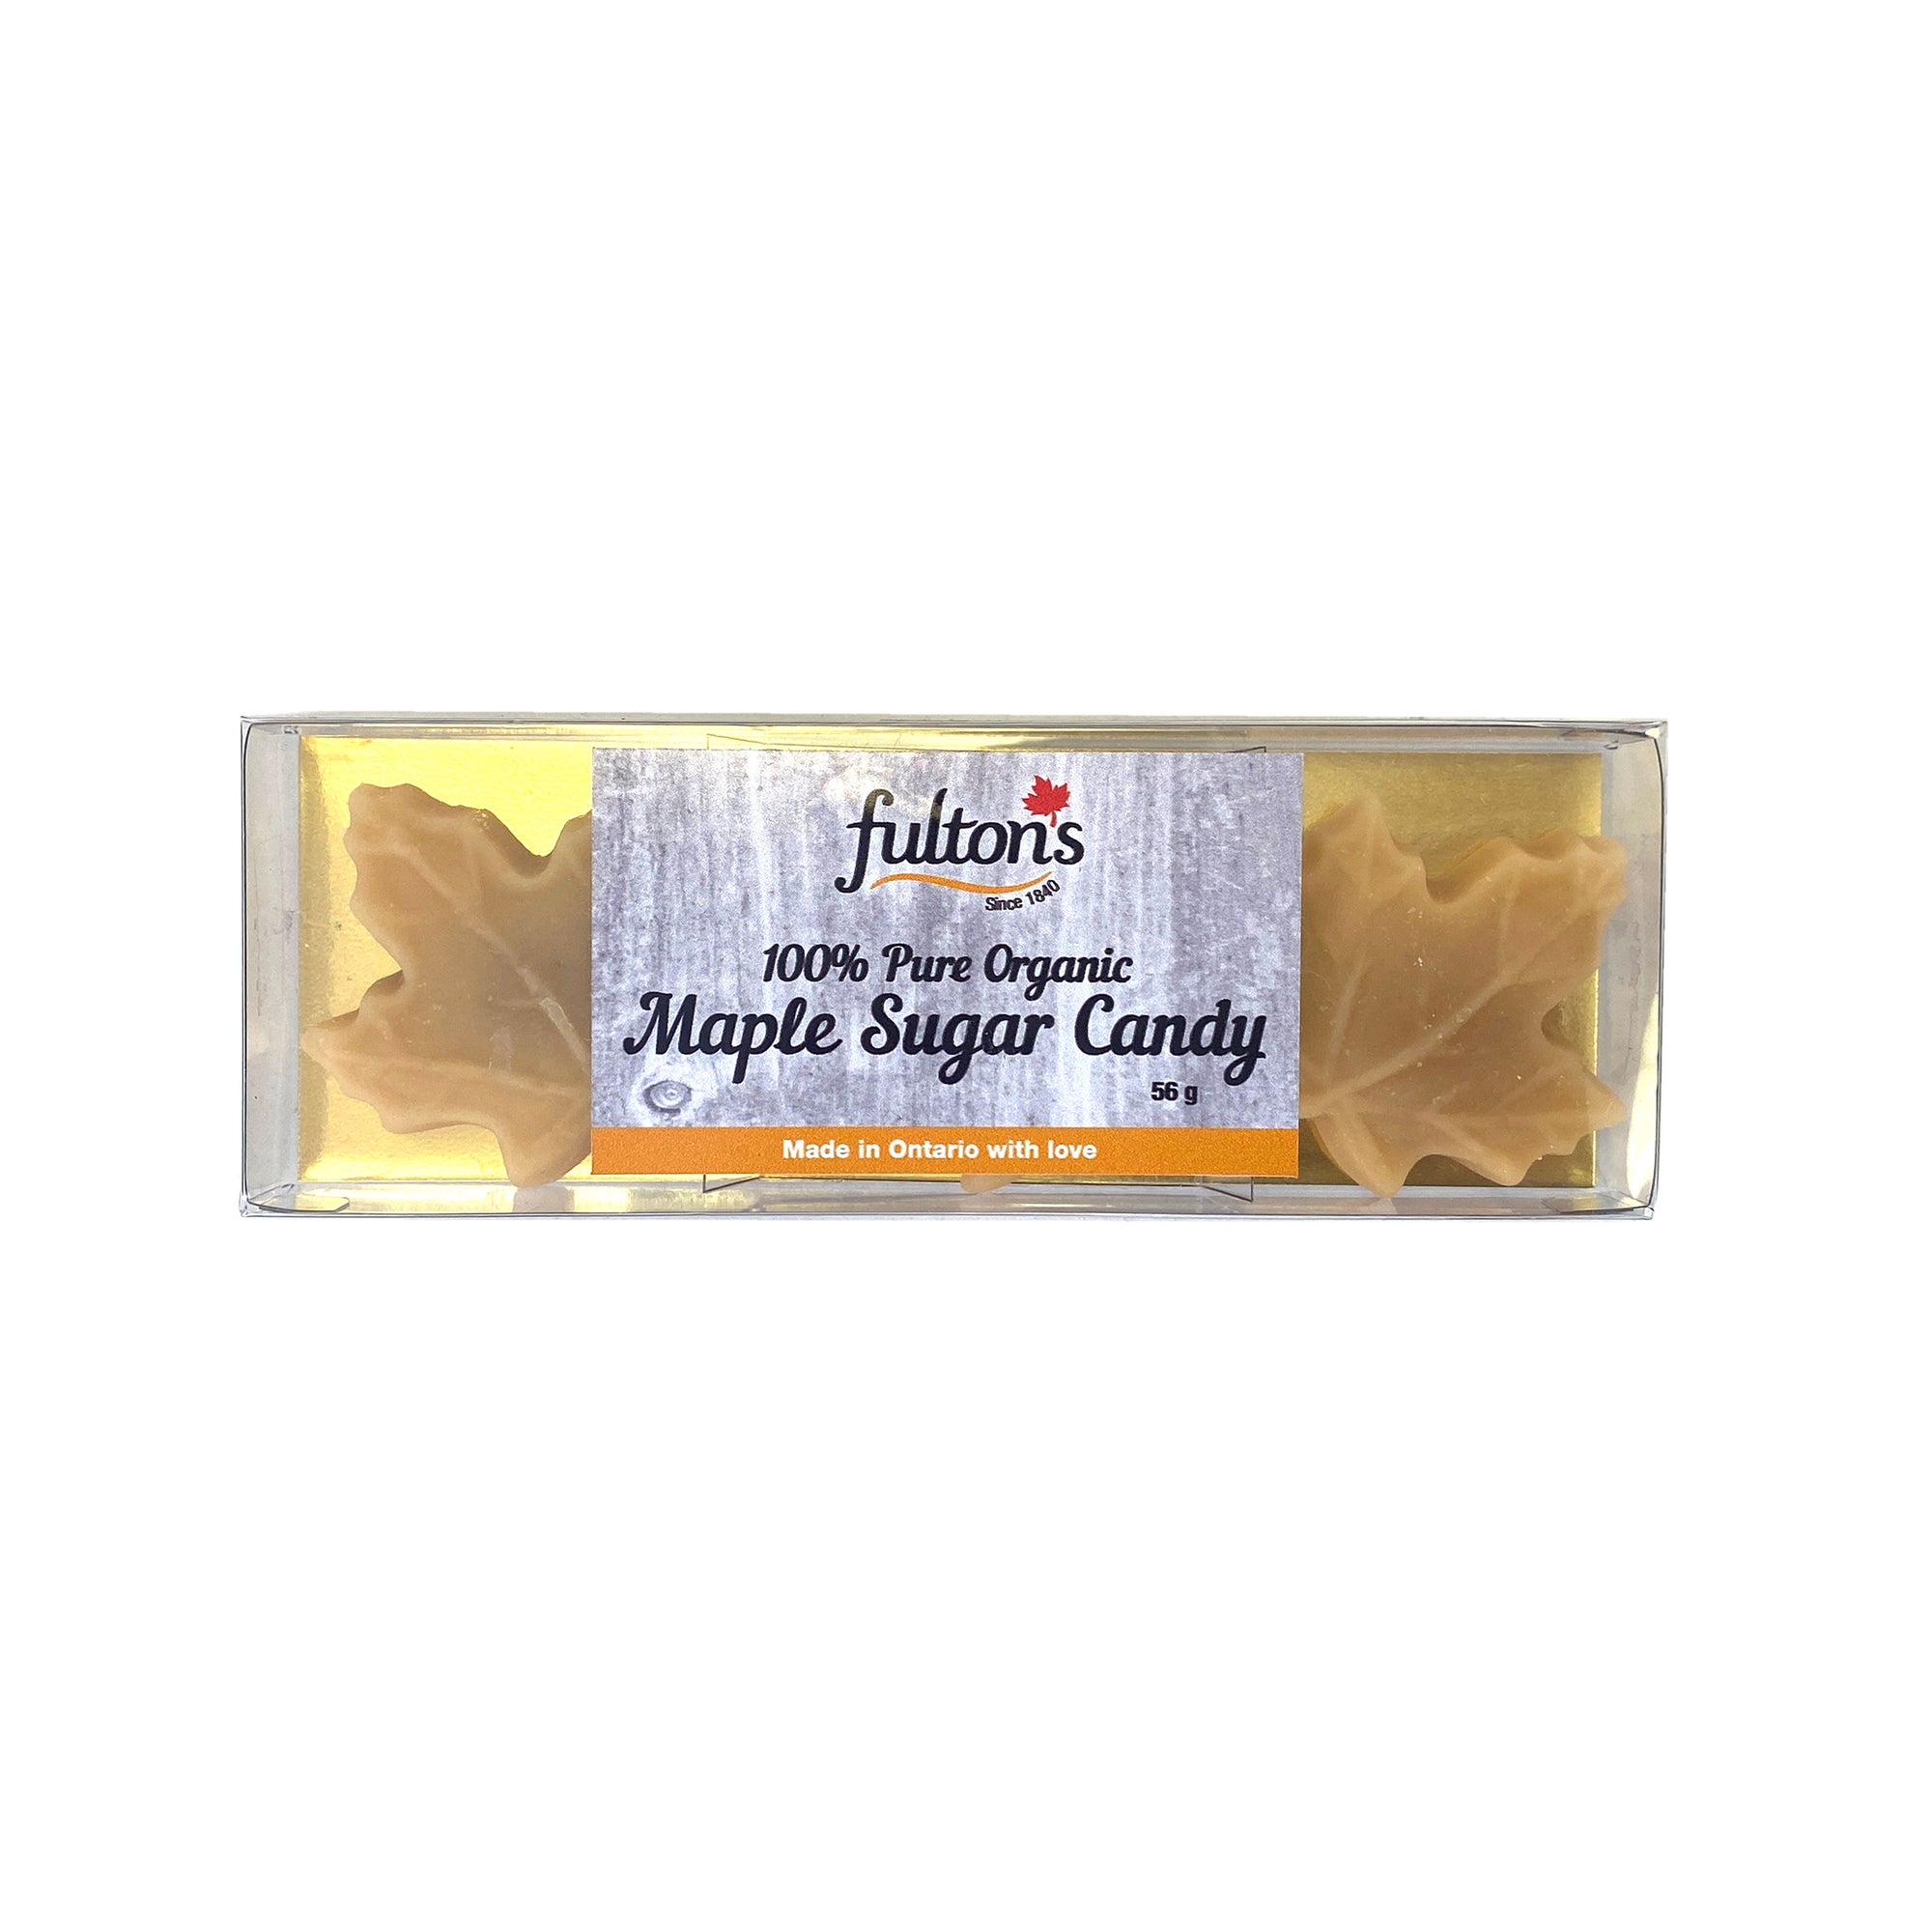 A package of three maple sugar candies in the shape of maple leafs.